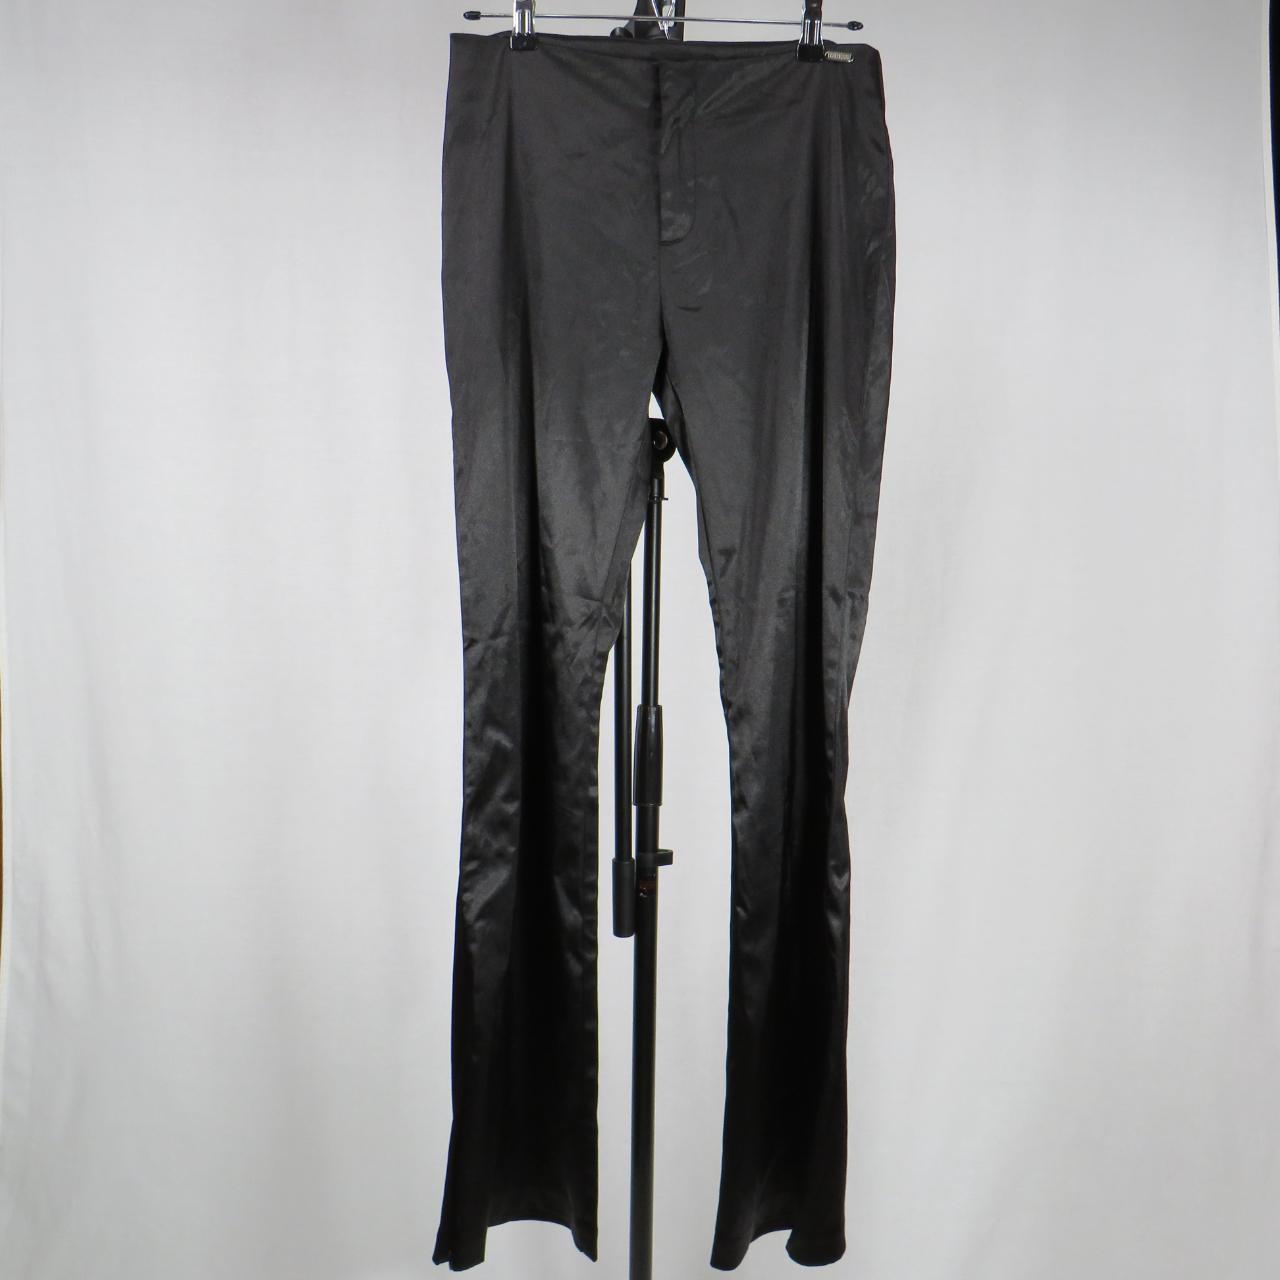 Guess satin feel stretch polyester pants with 10